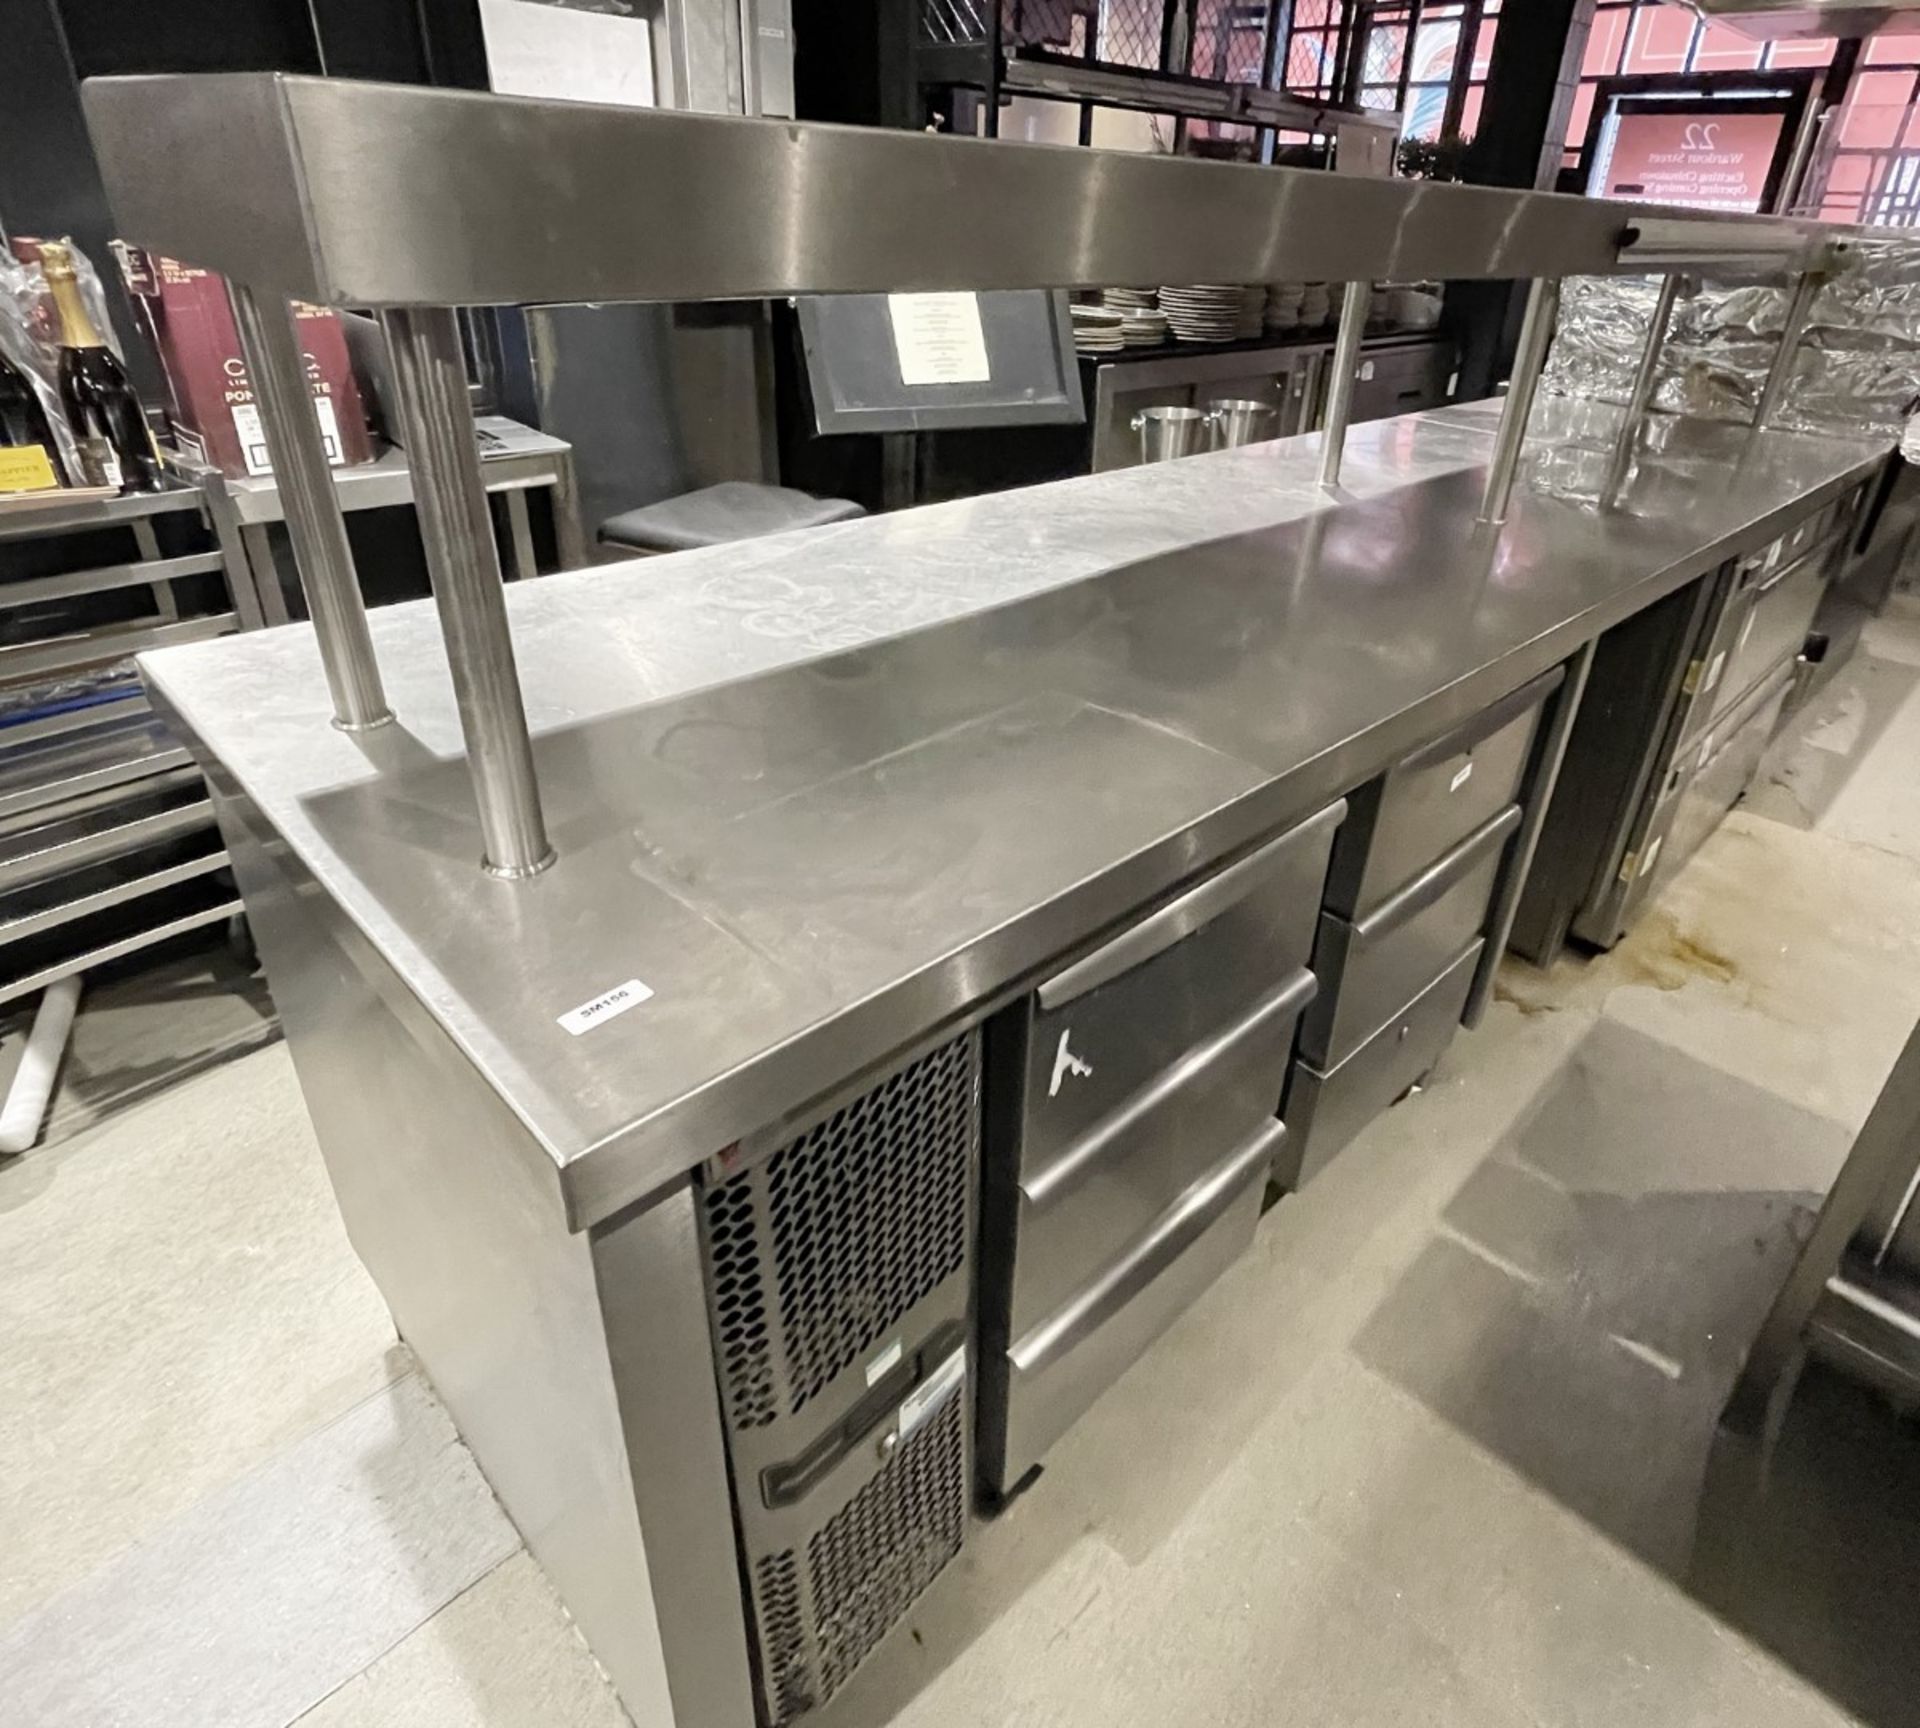 1 x Bespoke 15ft Commercial Kitchen Preparation Island with a Stainless Steel Construction - Image 4 of 15